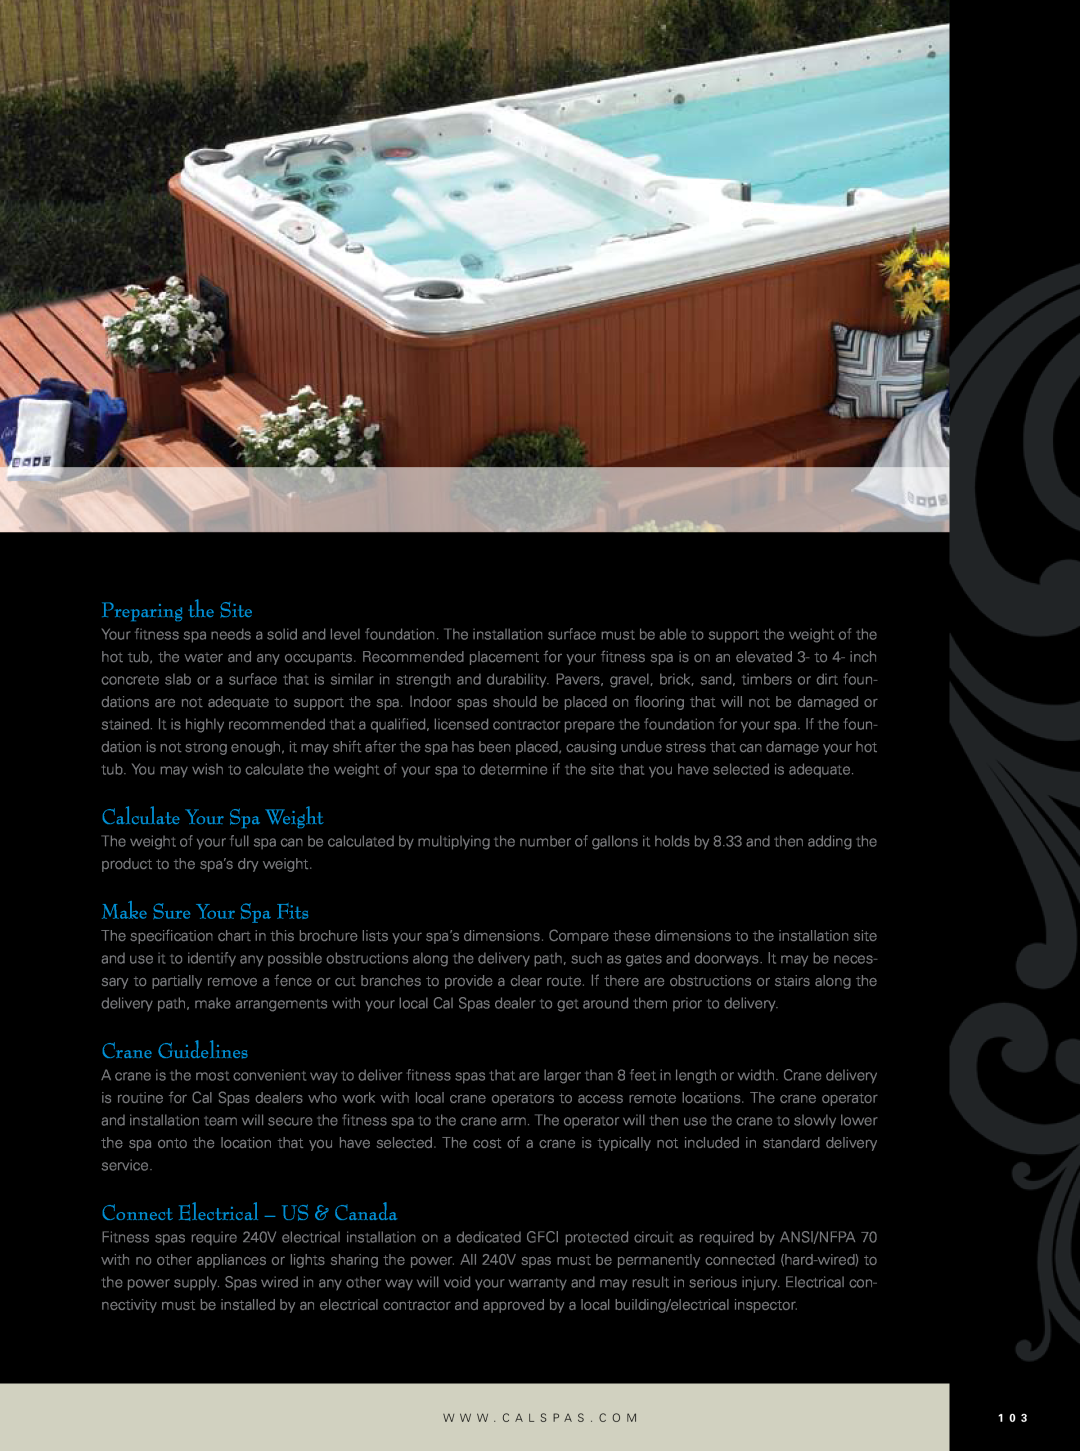 Cal Flame Hot Tub manual Preparing the Site, Calculate Your Spa Weight, Make Sure Your Spa Fits, Crane Guidelines 